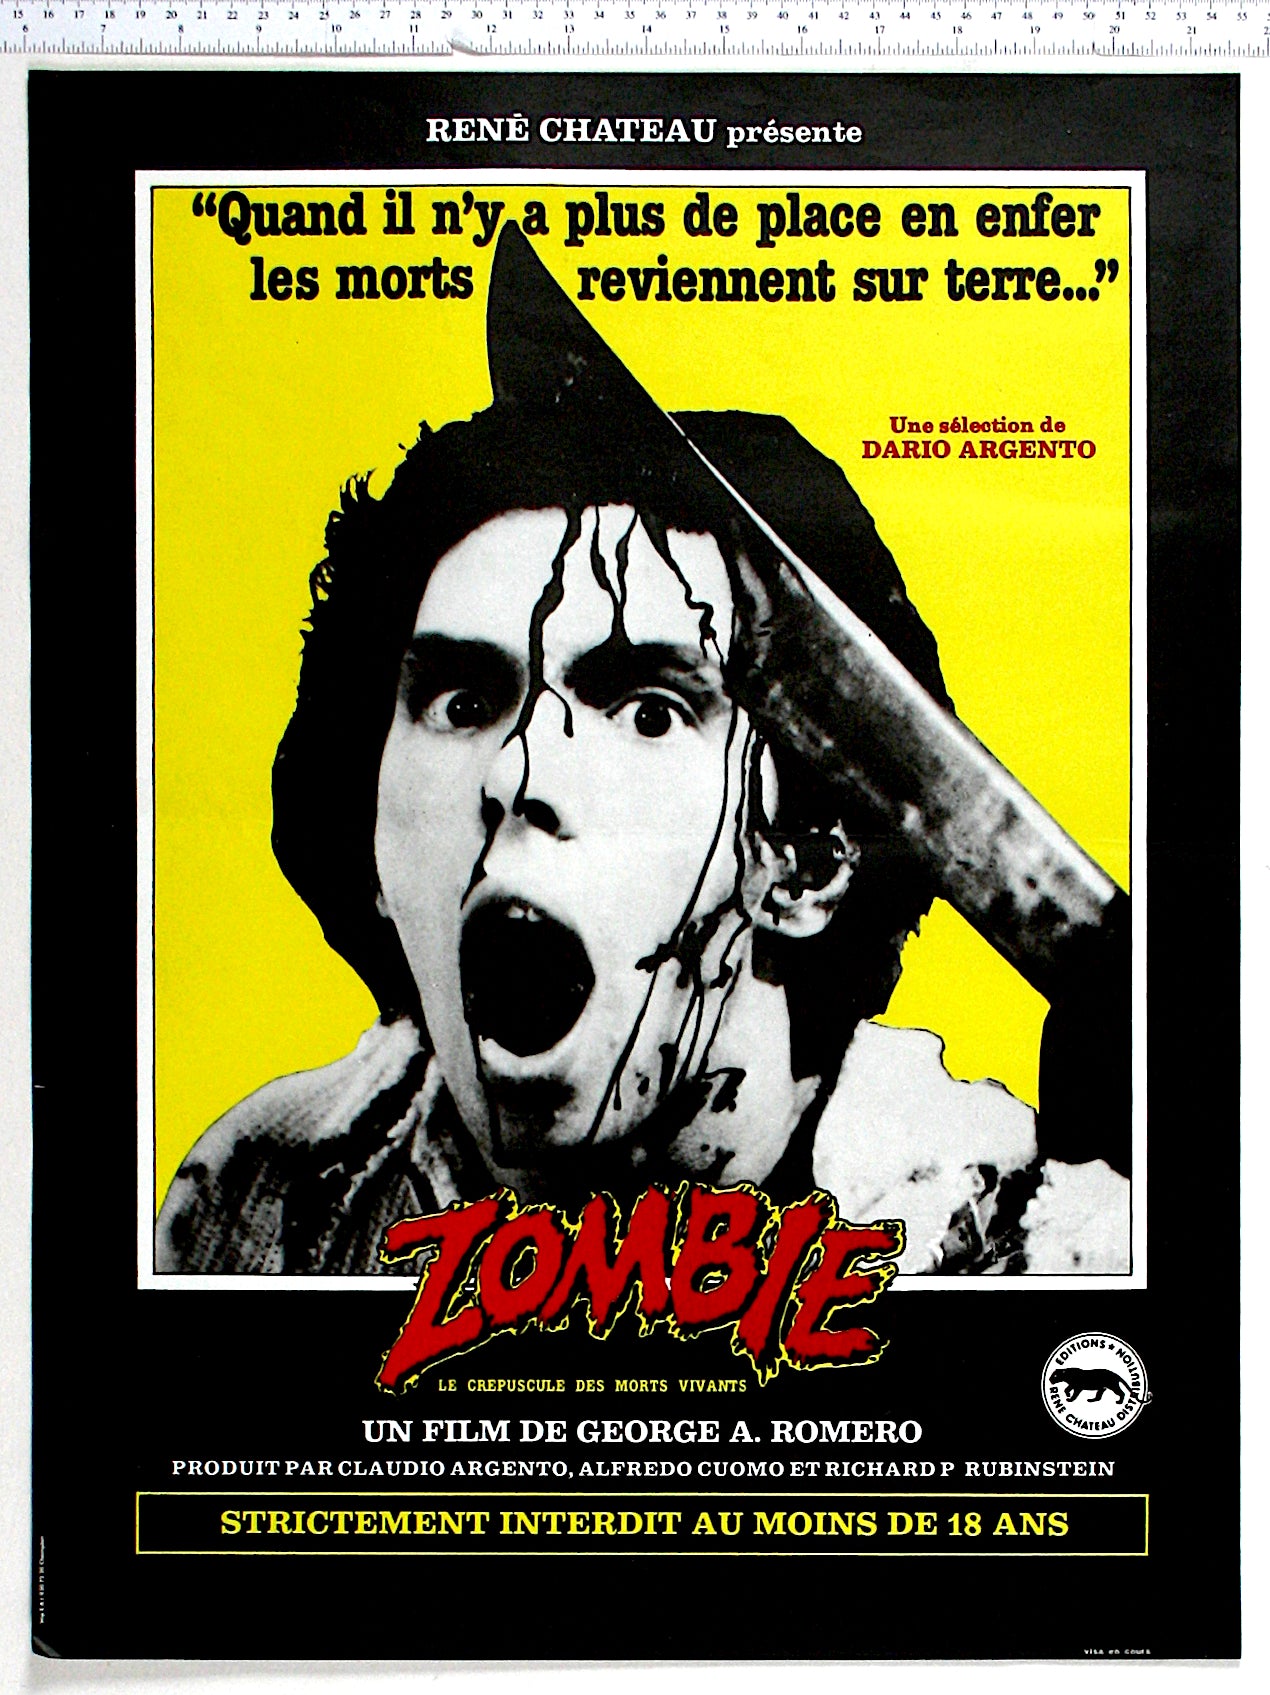 Boxed against yellow, black and white shot of the machete zombie, with the Zombie title in blood-red below.